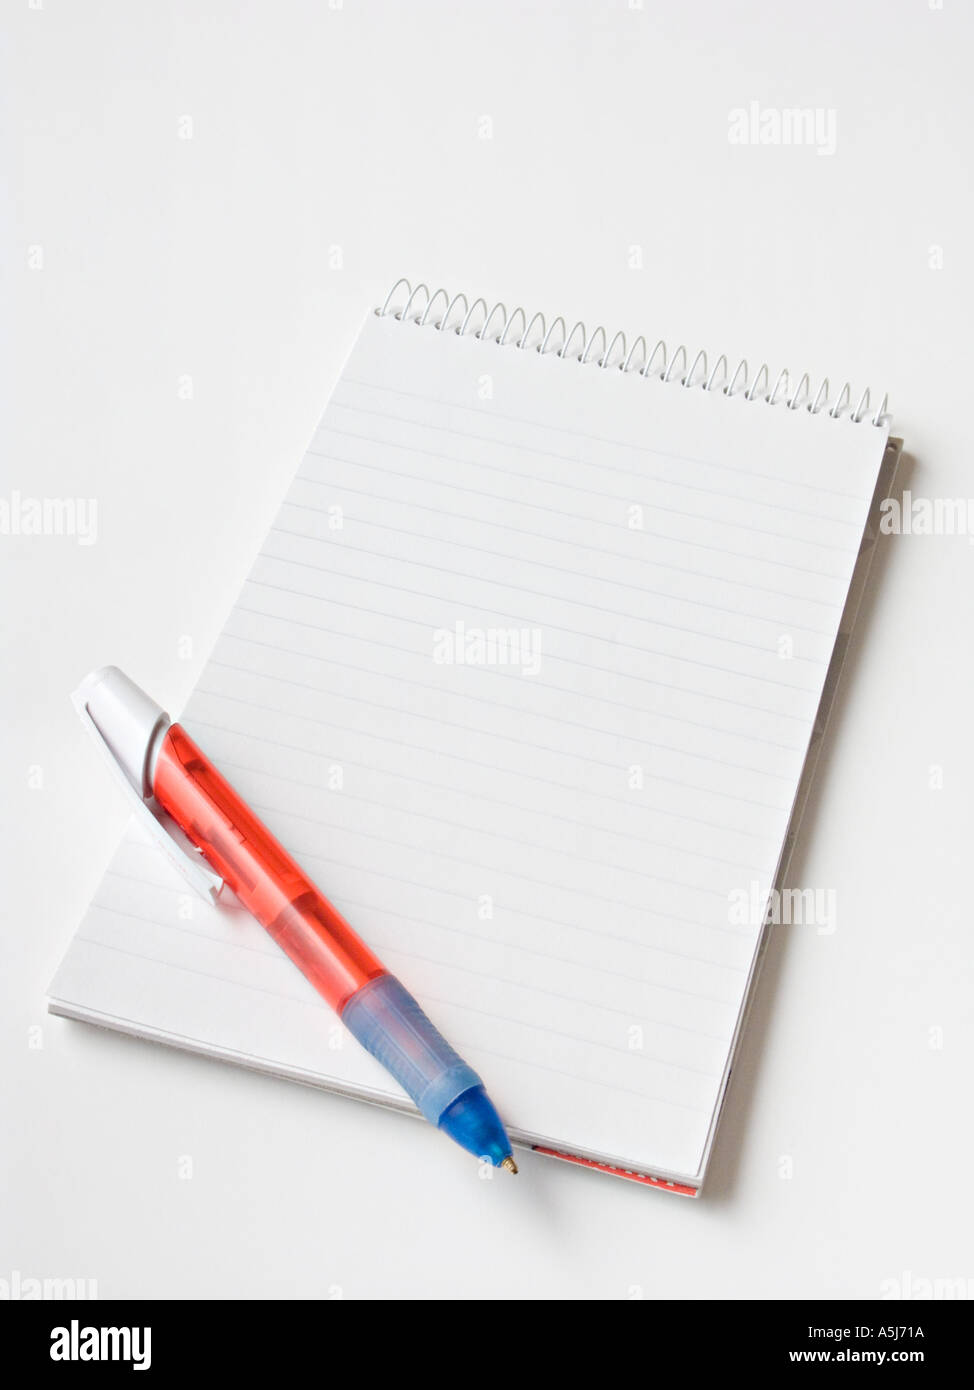 A Spiral Bound Notepad With A Red Pen On A Plain White Background Stock Photo Alamy